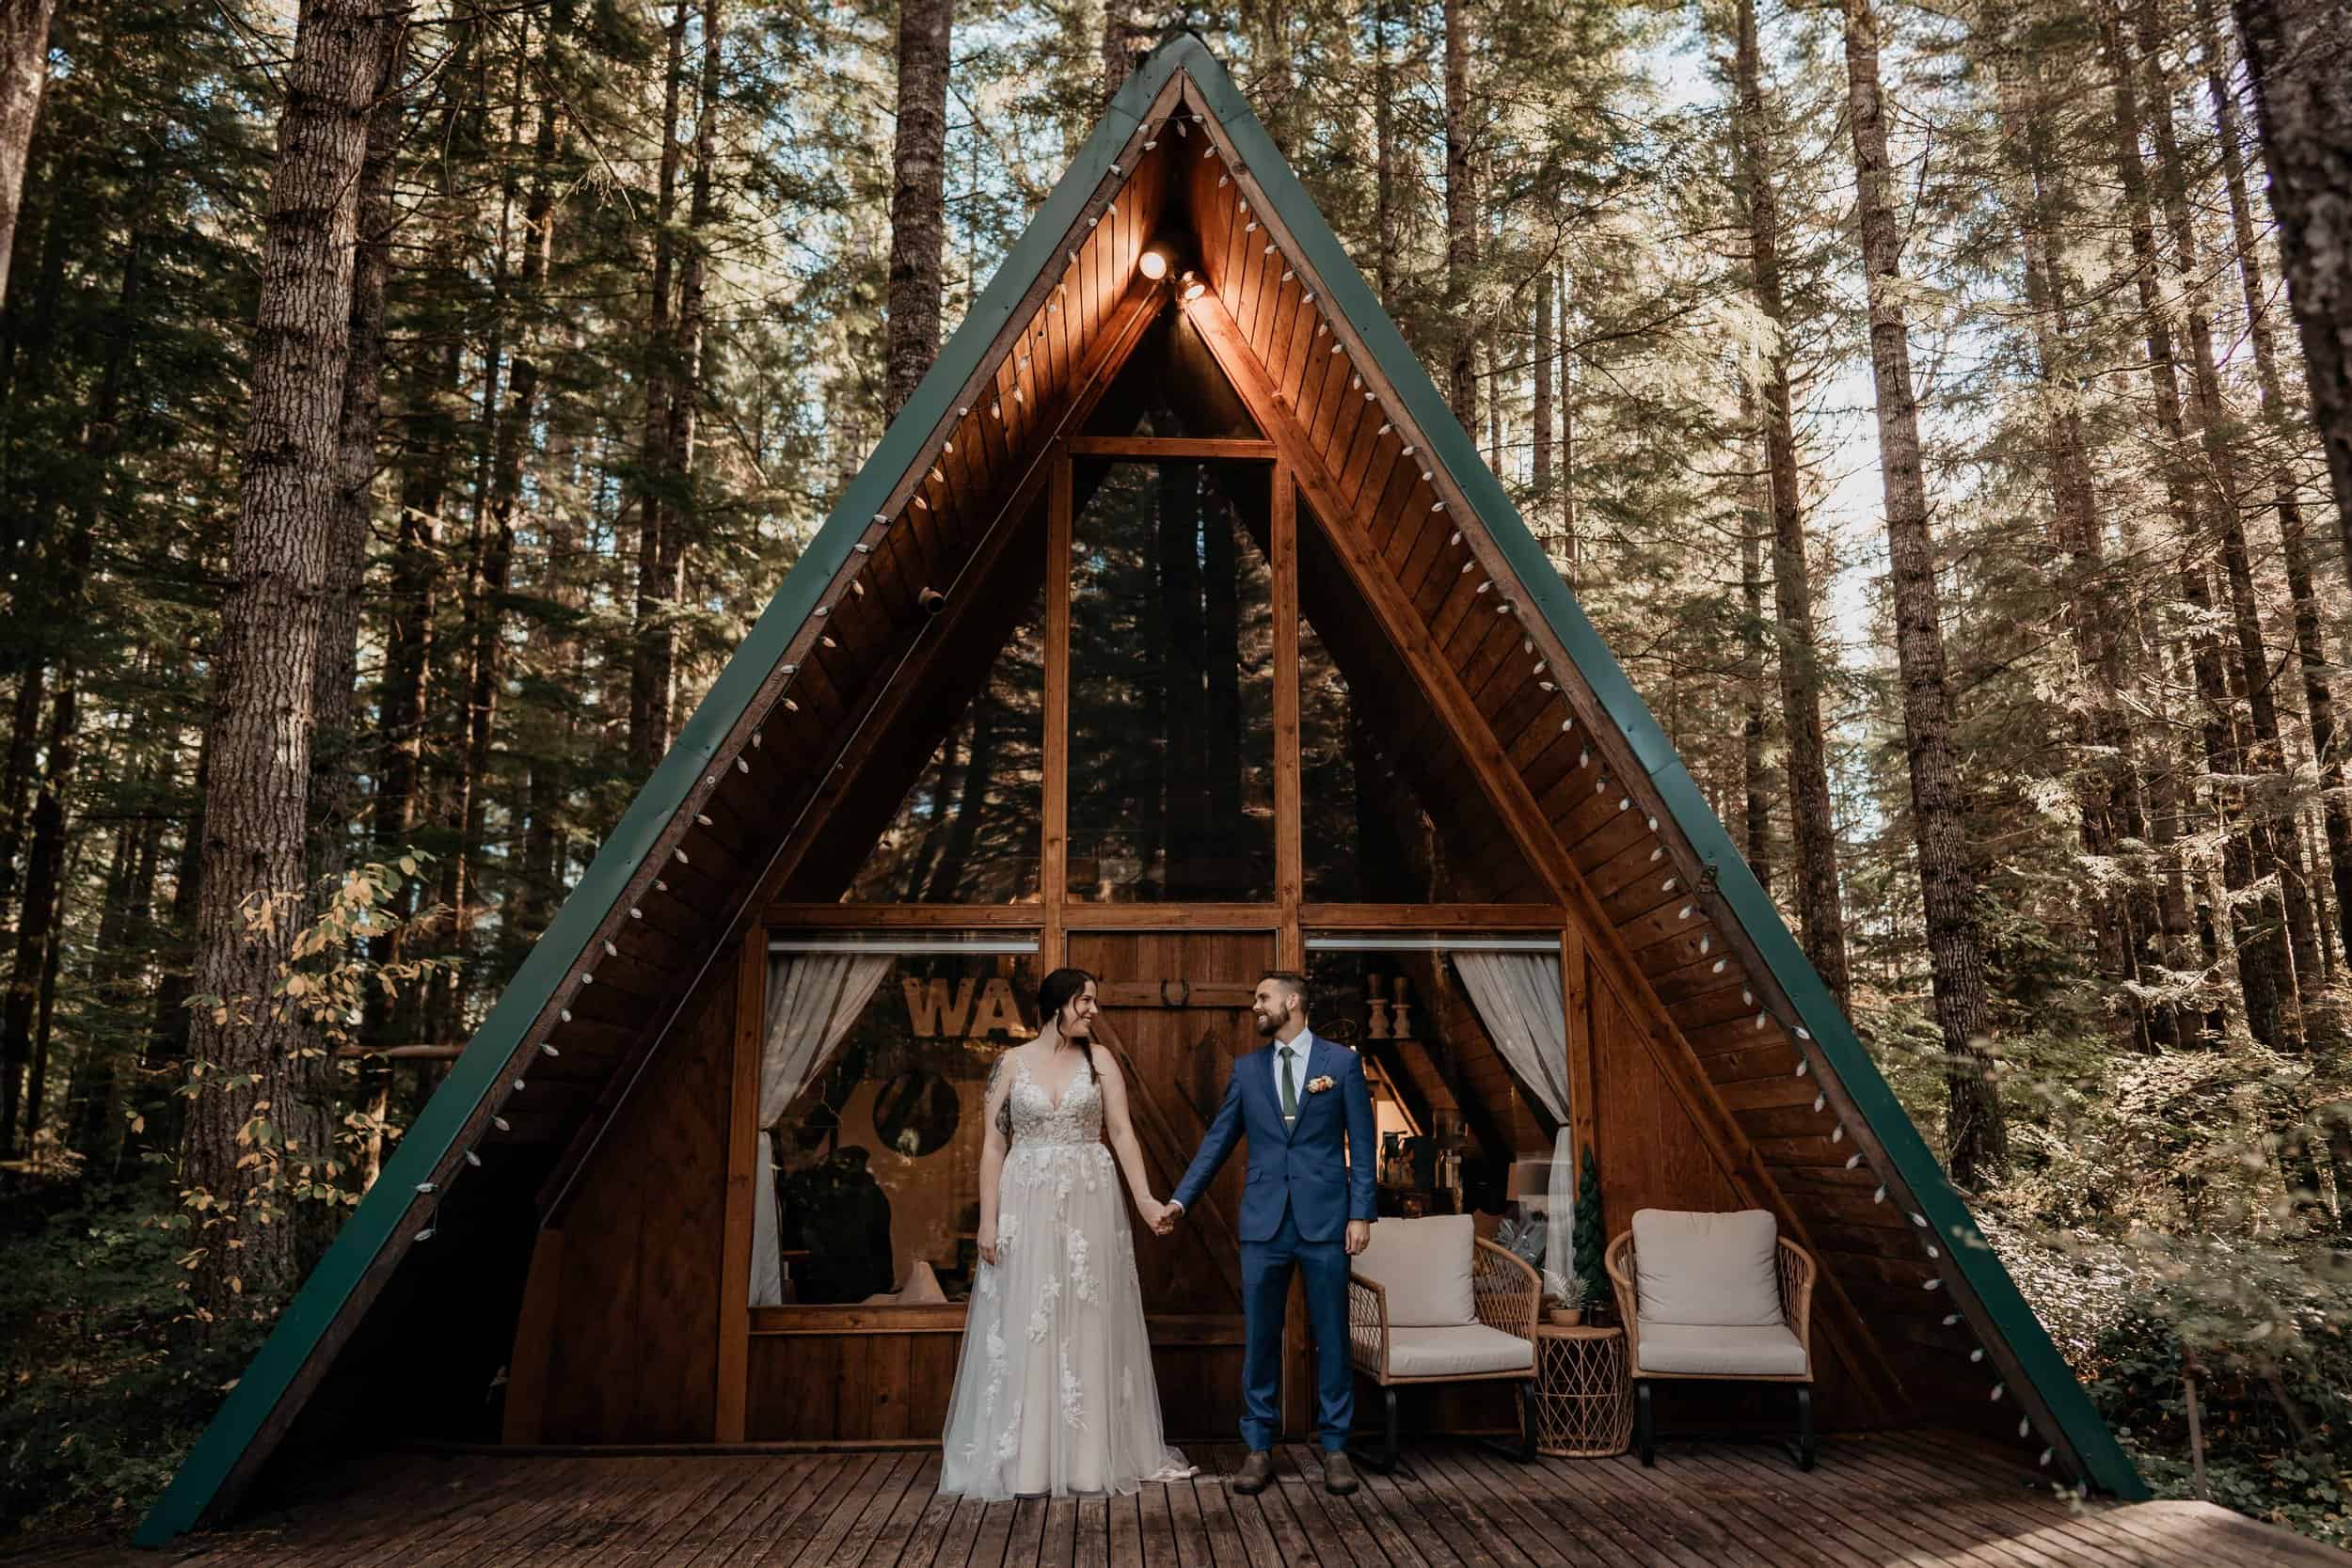 Planning the logistics of an Airbnb wedding